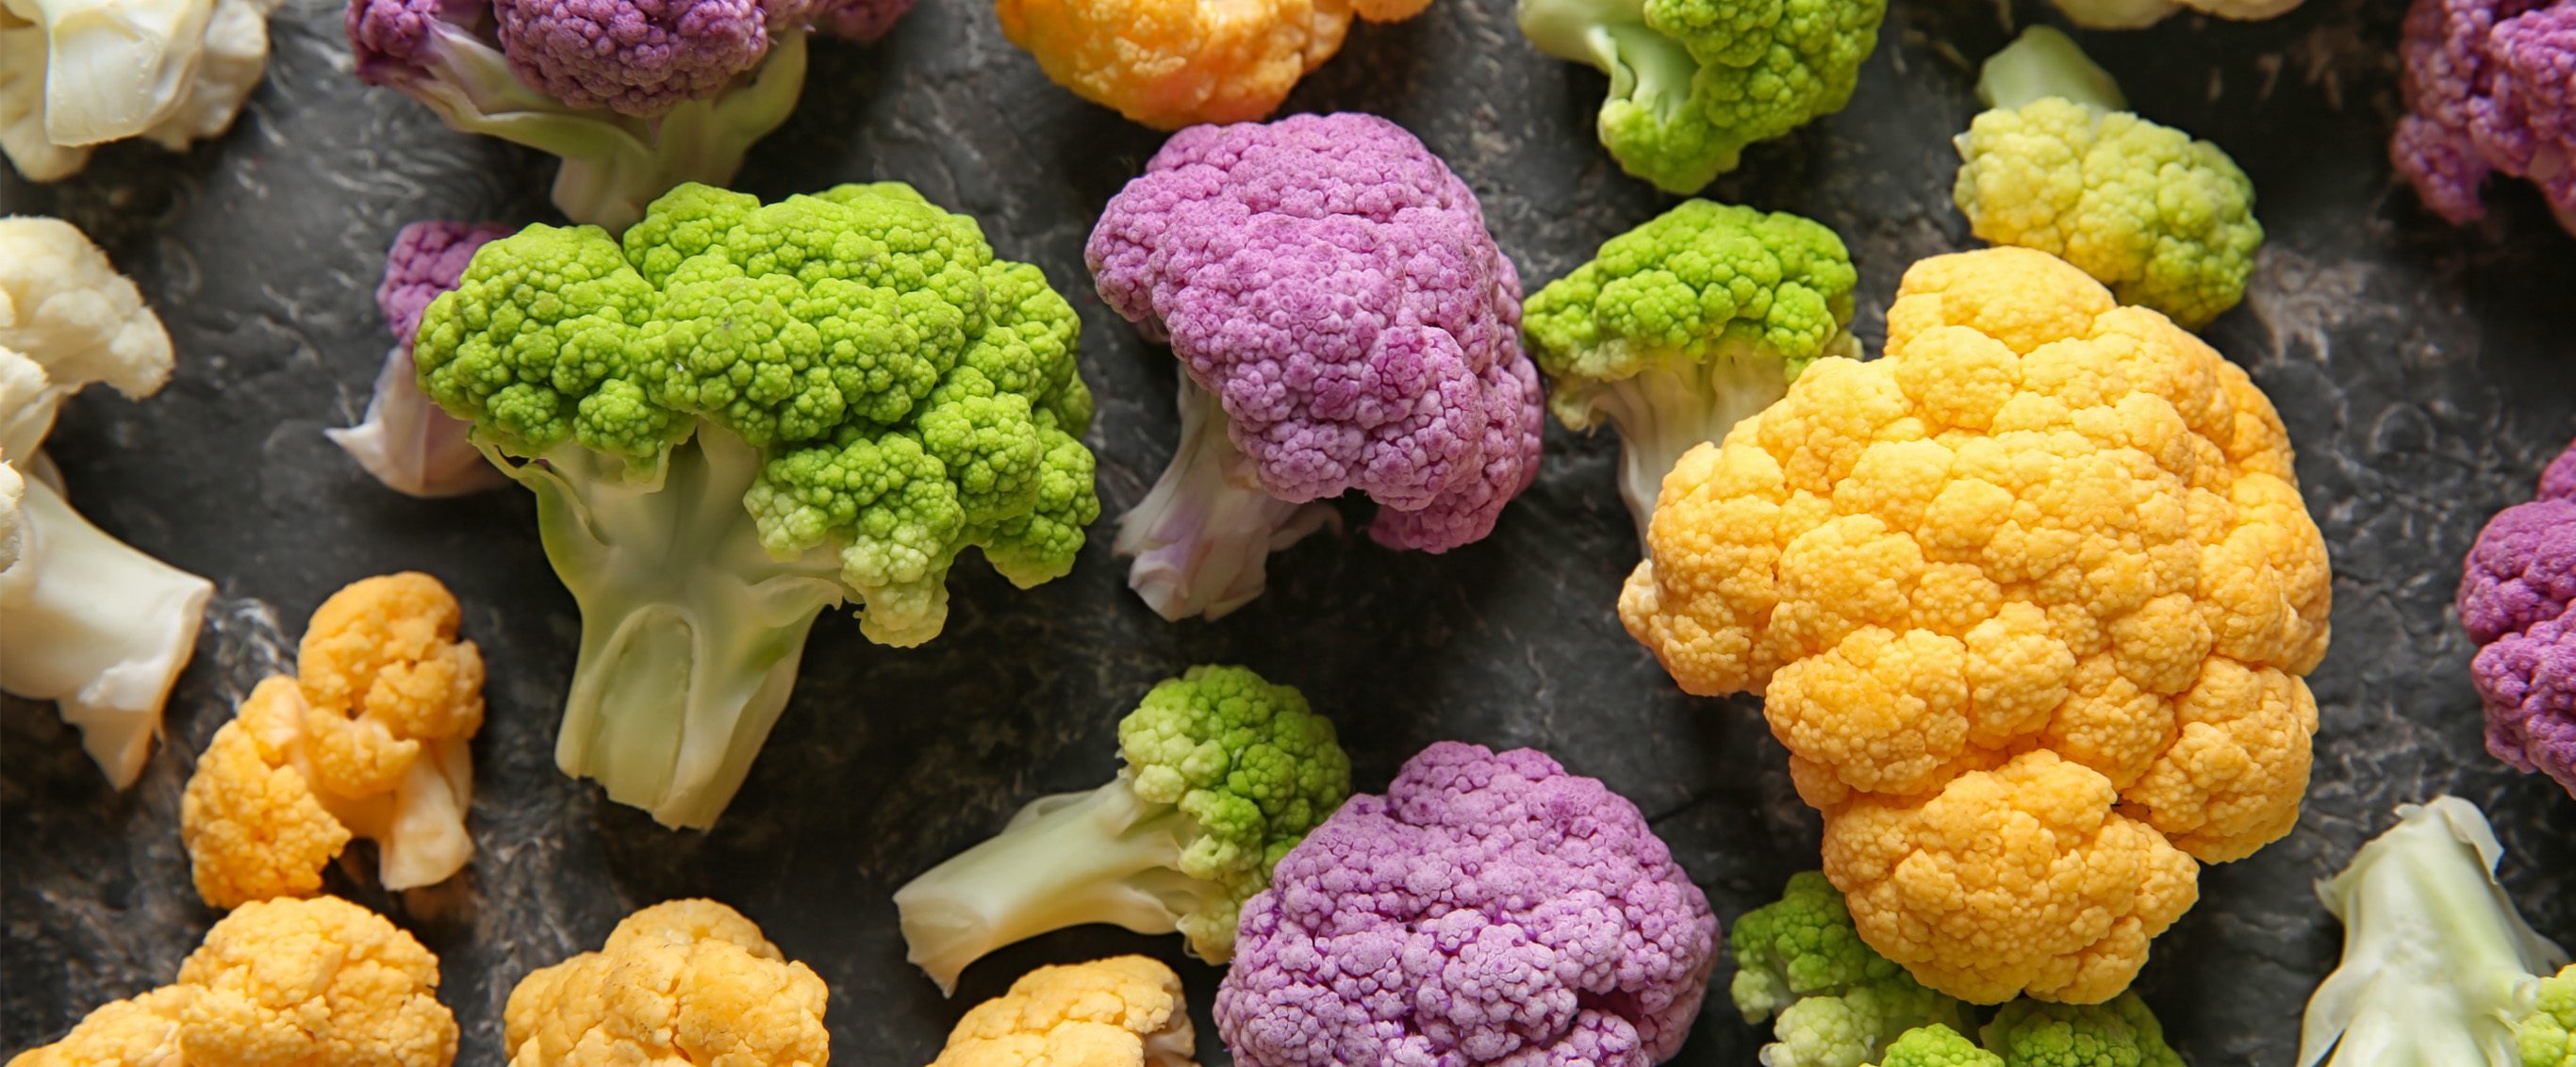 Cauliflower Cooking Tips, Recipes and More | Forks Over Knives